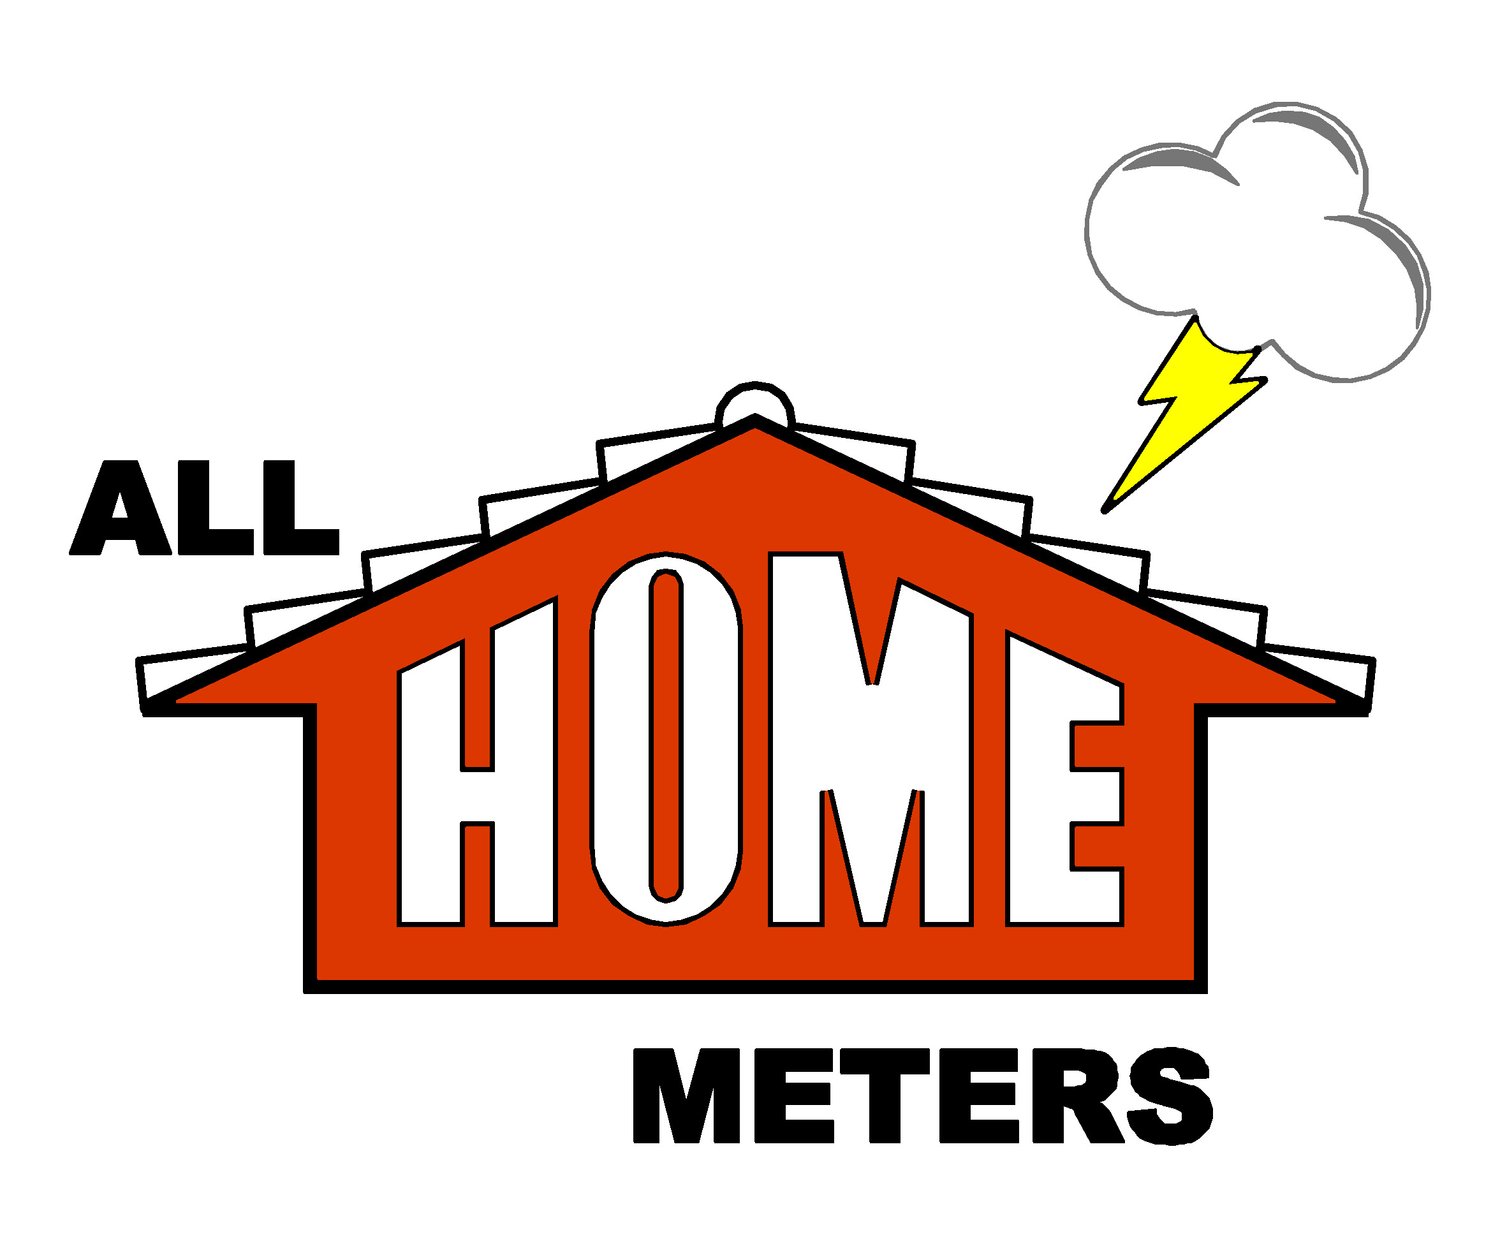 ALL HOME METERS (40 Year Recertification & Infrared Thermography Inspections Miami))